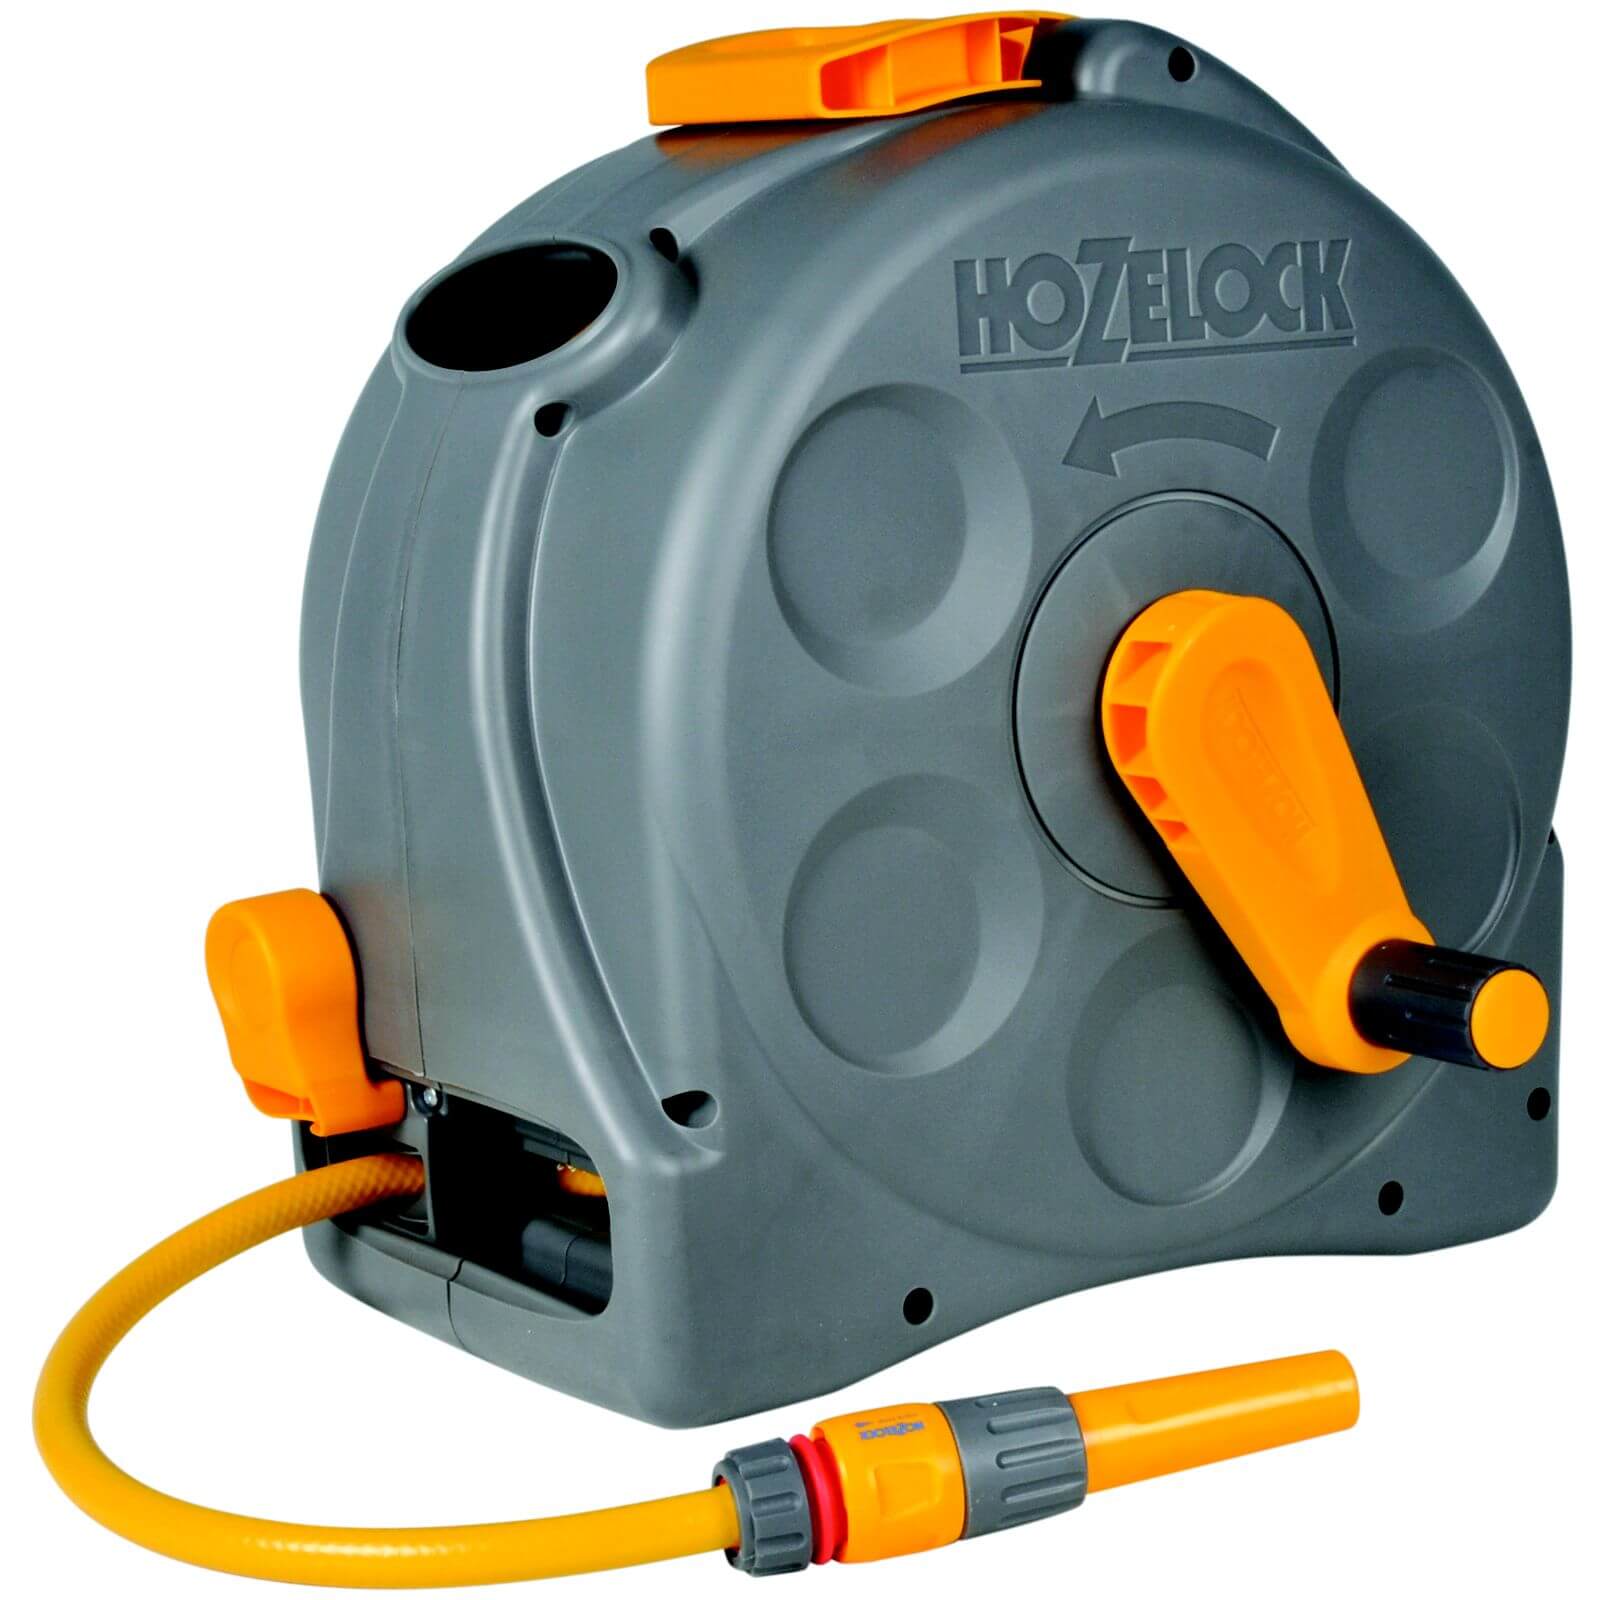 Hozelock 2 in 1 Compact Enclosed Hose Reel - 25m